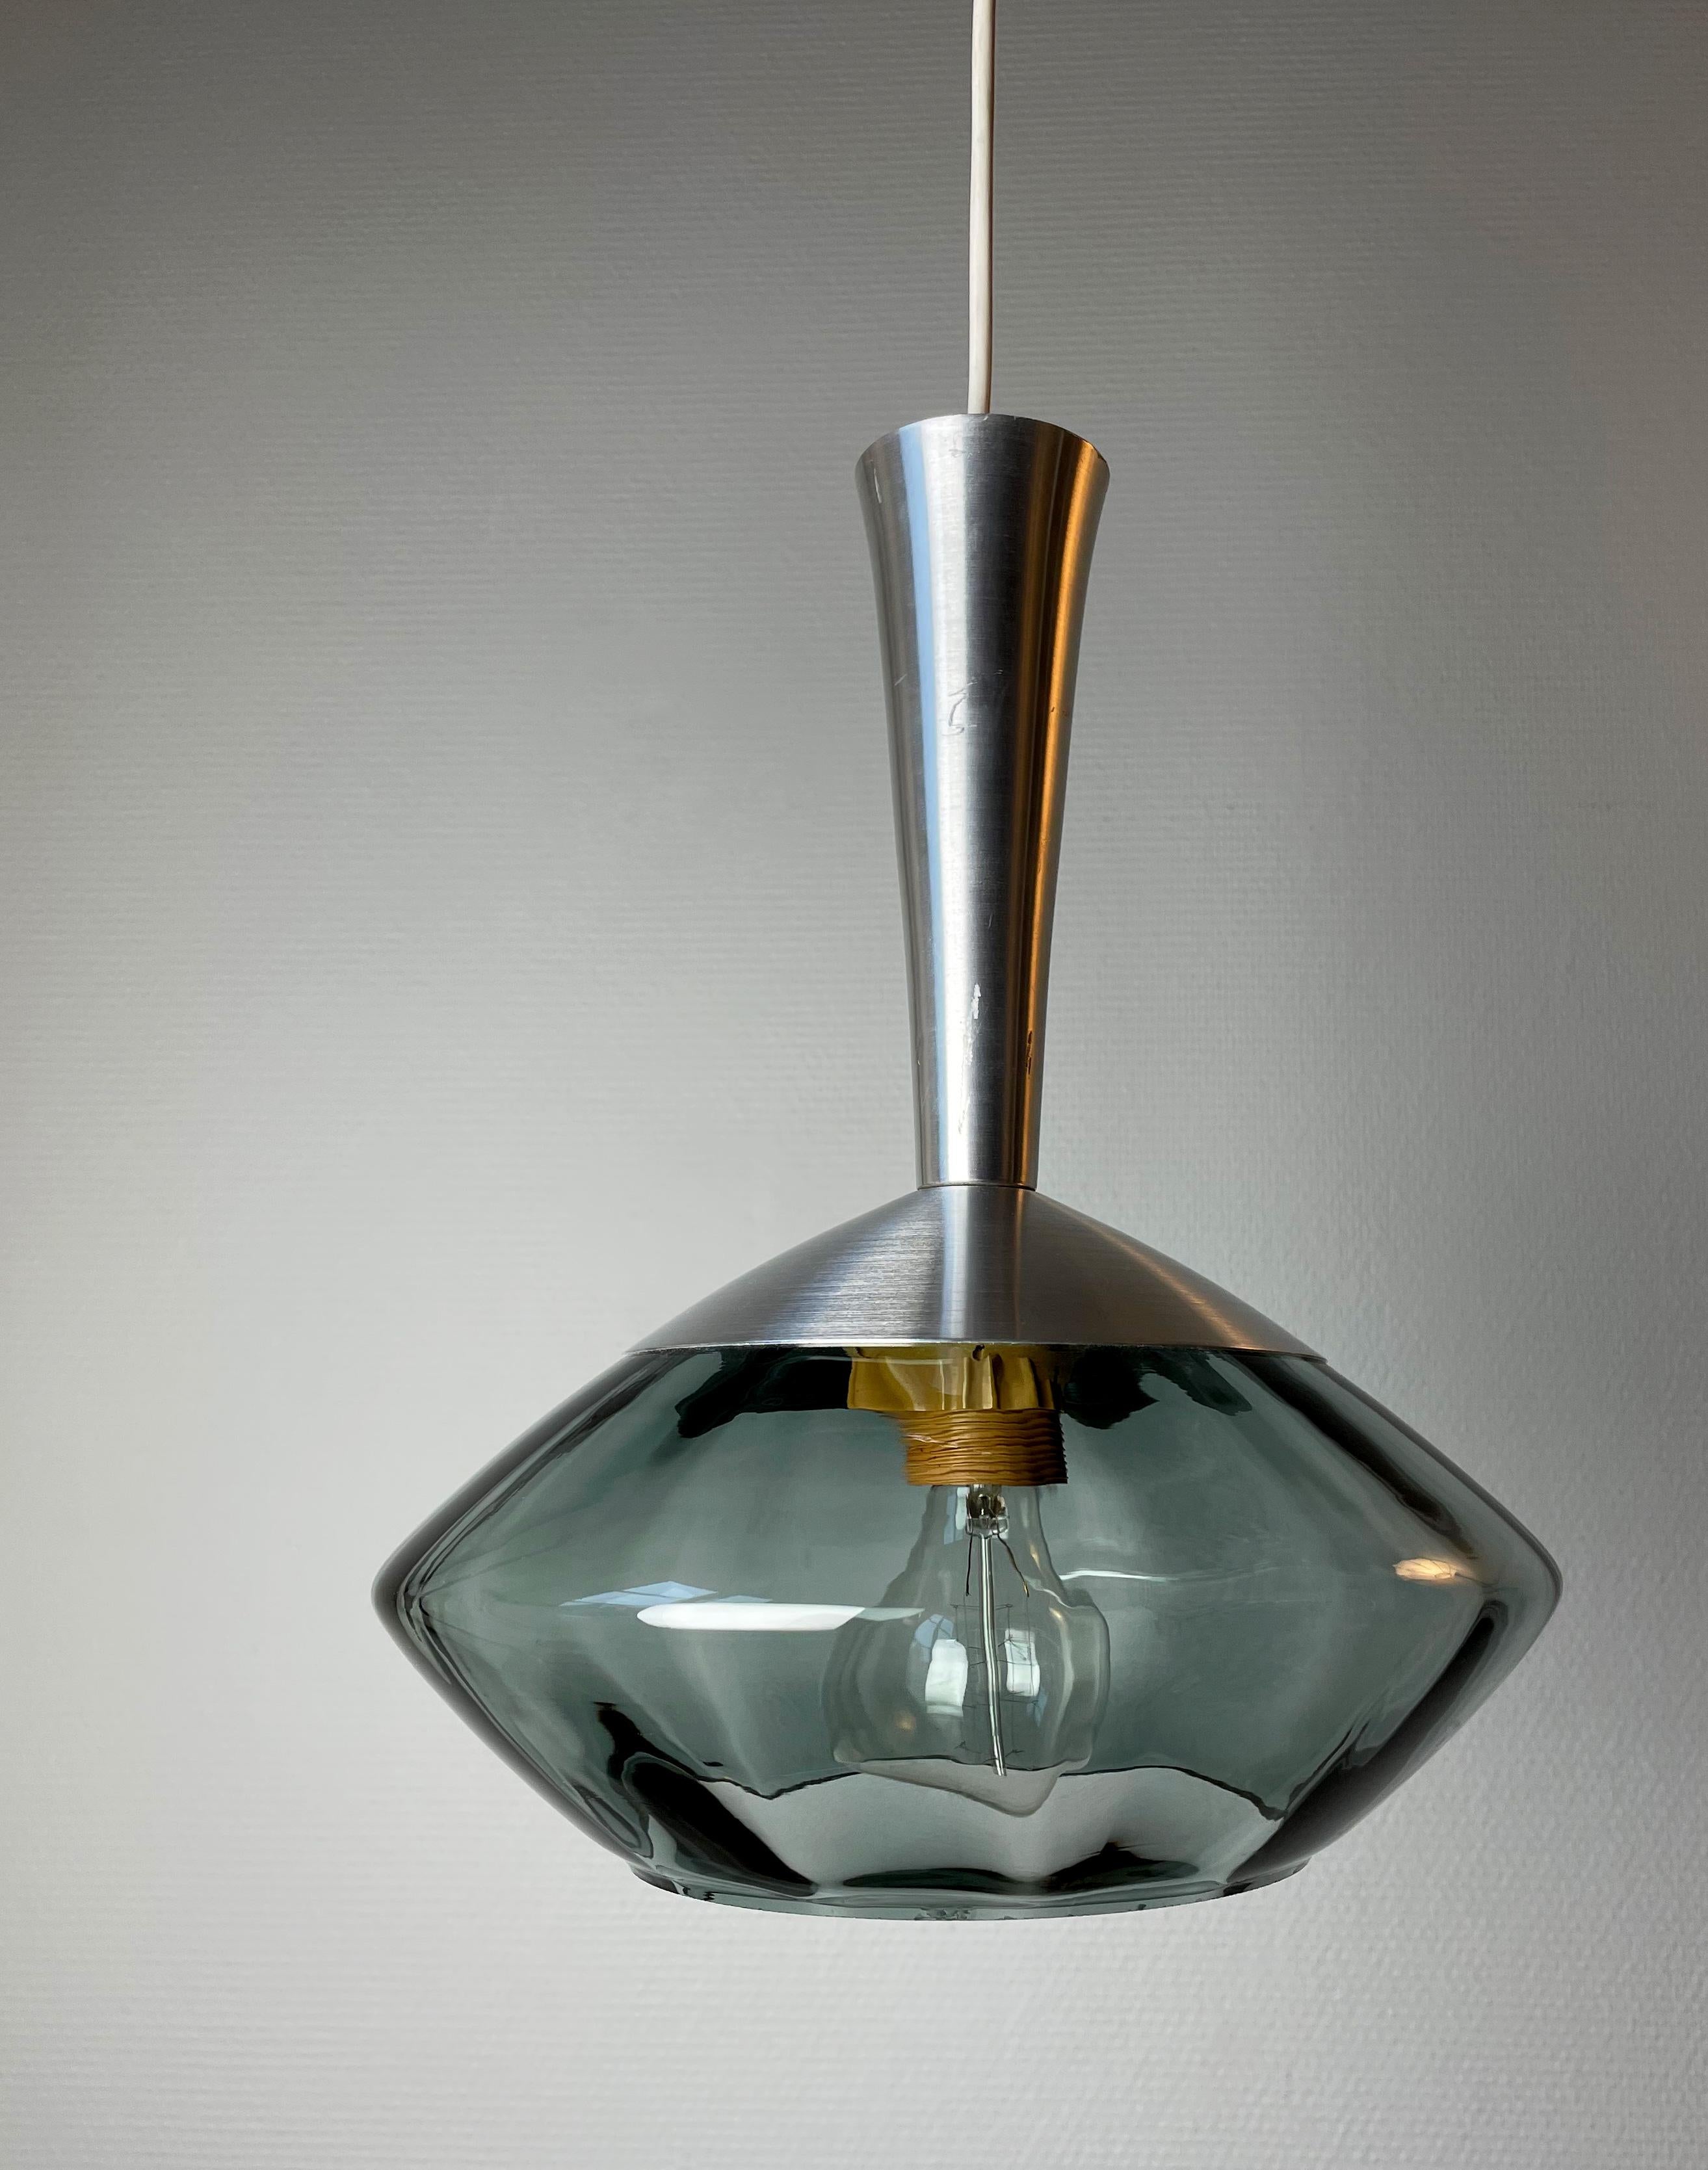 Sleek vintage midcentury modernist blown smokey bluish gray glass and metal pendant manufactured by Swedish Orrefors in the late 1950s. Shiny metal top sits above the glass that is smooth on the outside with subtle vertical lines on the inside.